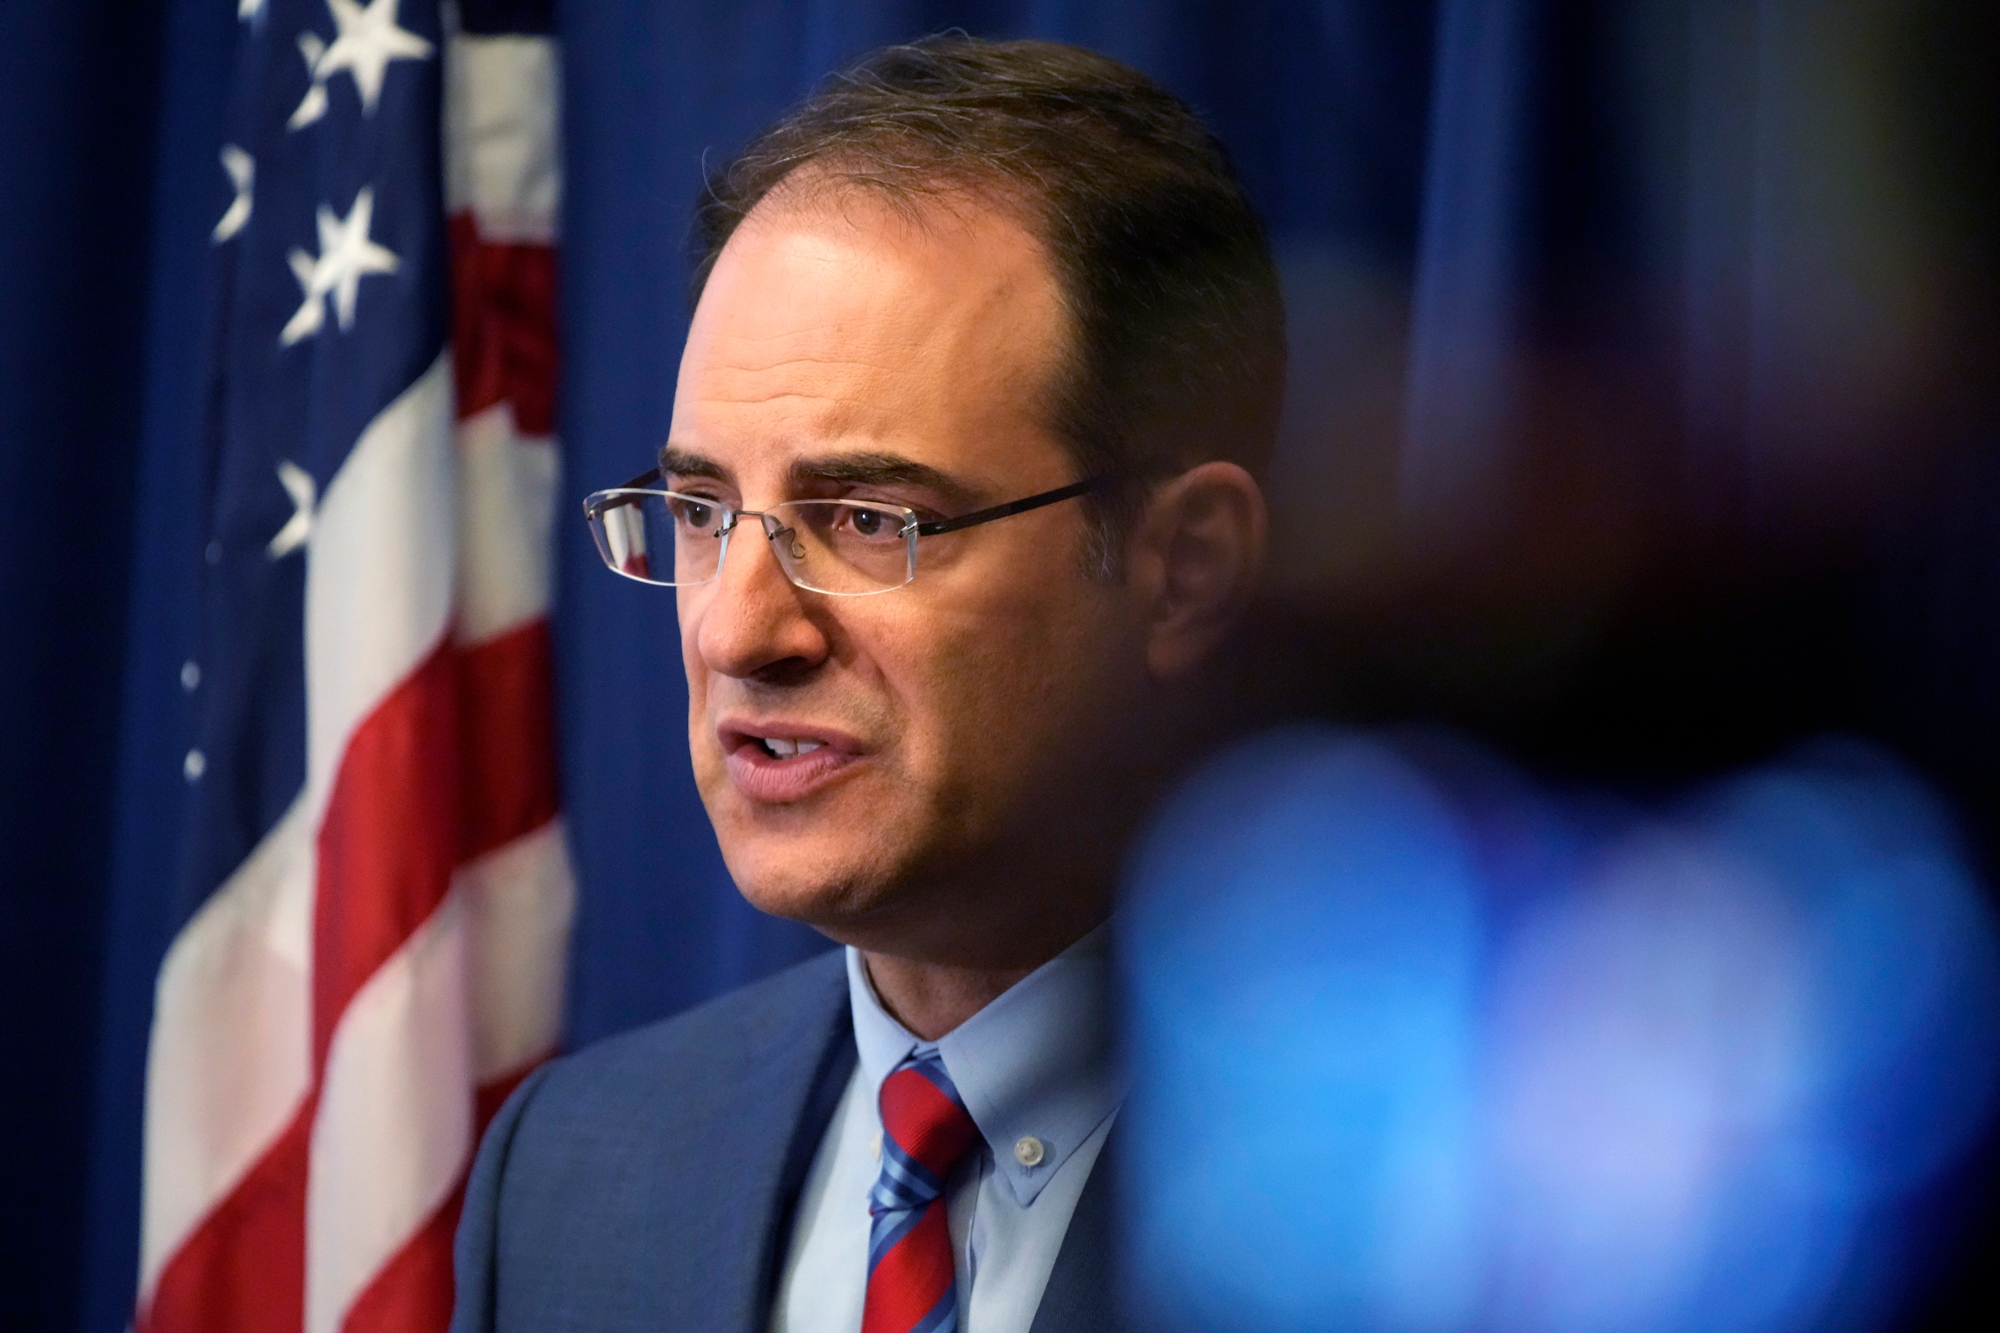 Colorado Attorney General Phil Weiser speaks at a news conference in Denver, Colorado on Wednesday, September 15, 2021.